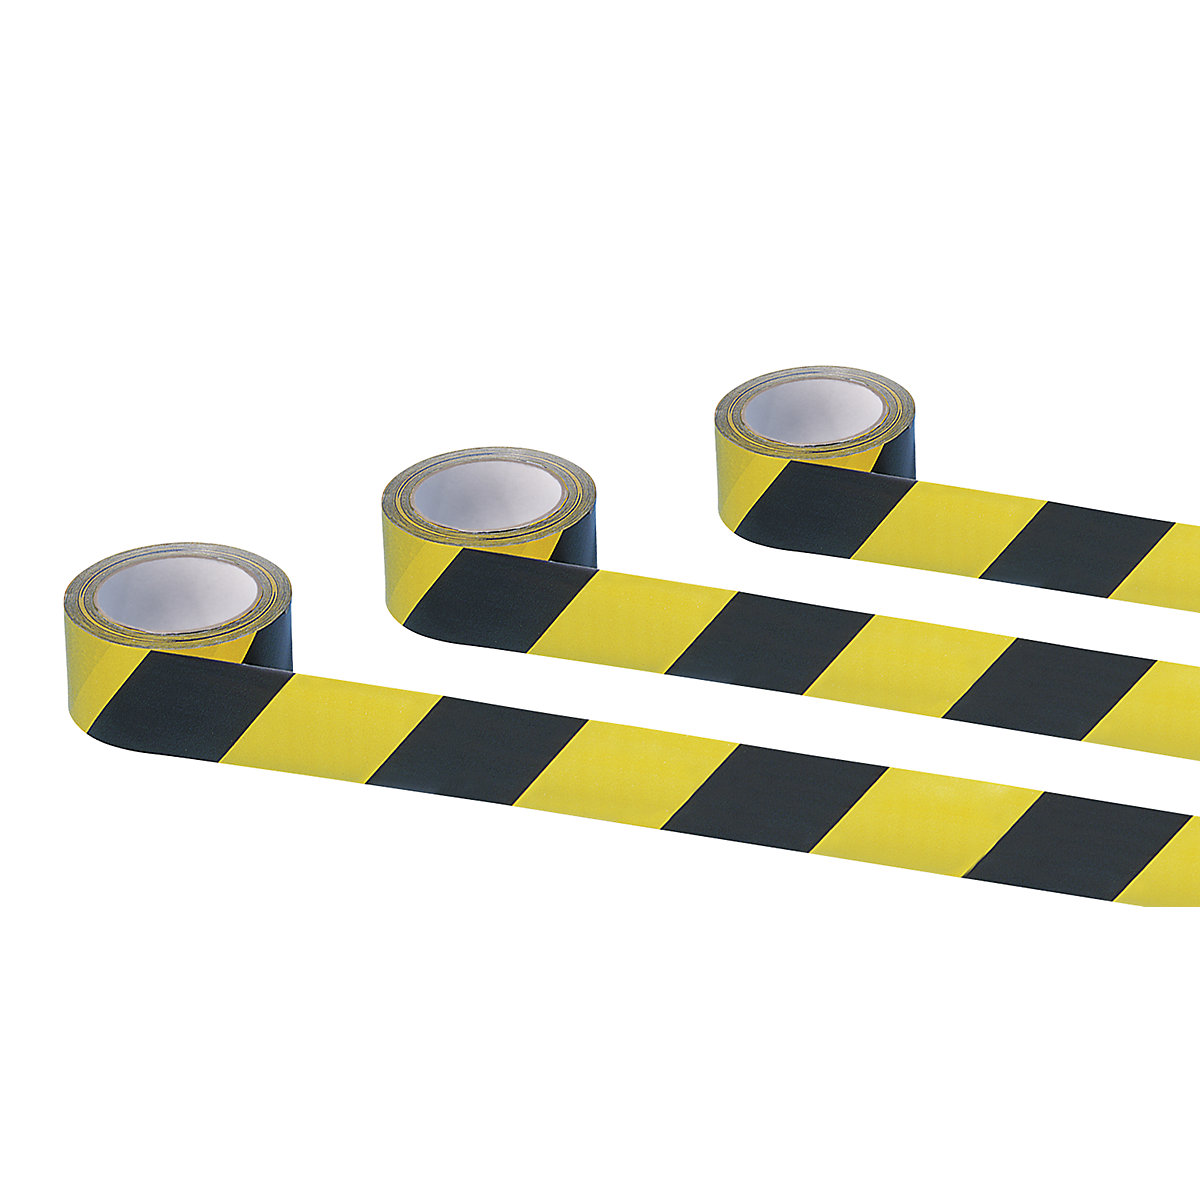 Self-adhesive warning and marking tape, black / yellow, pack of 3 rolls-2